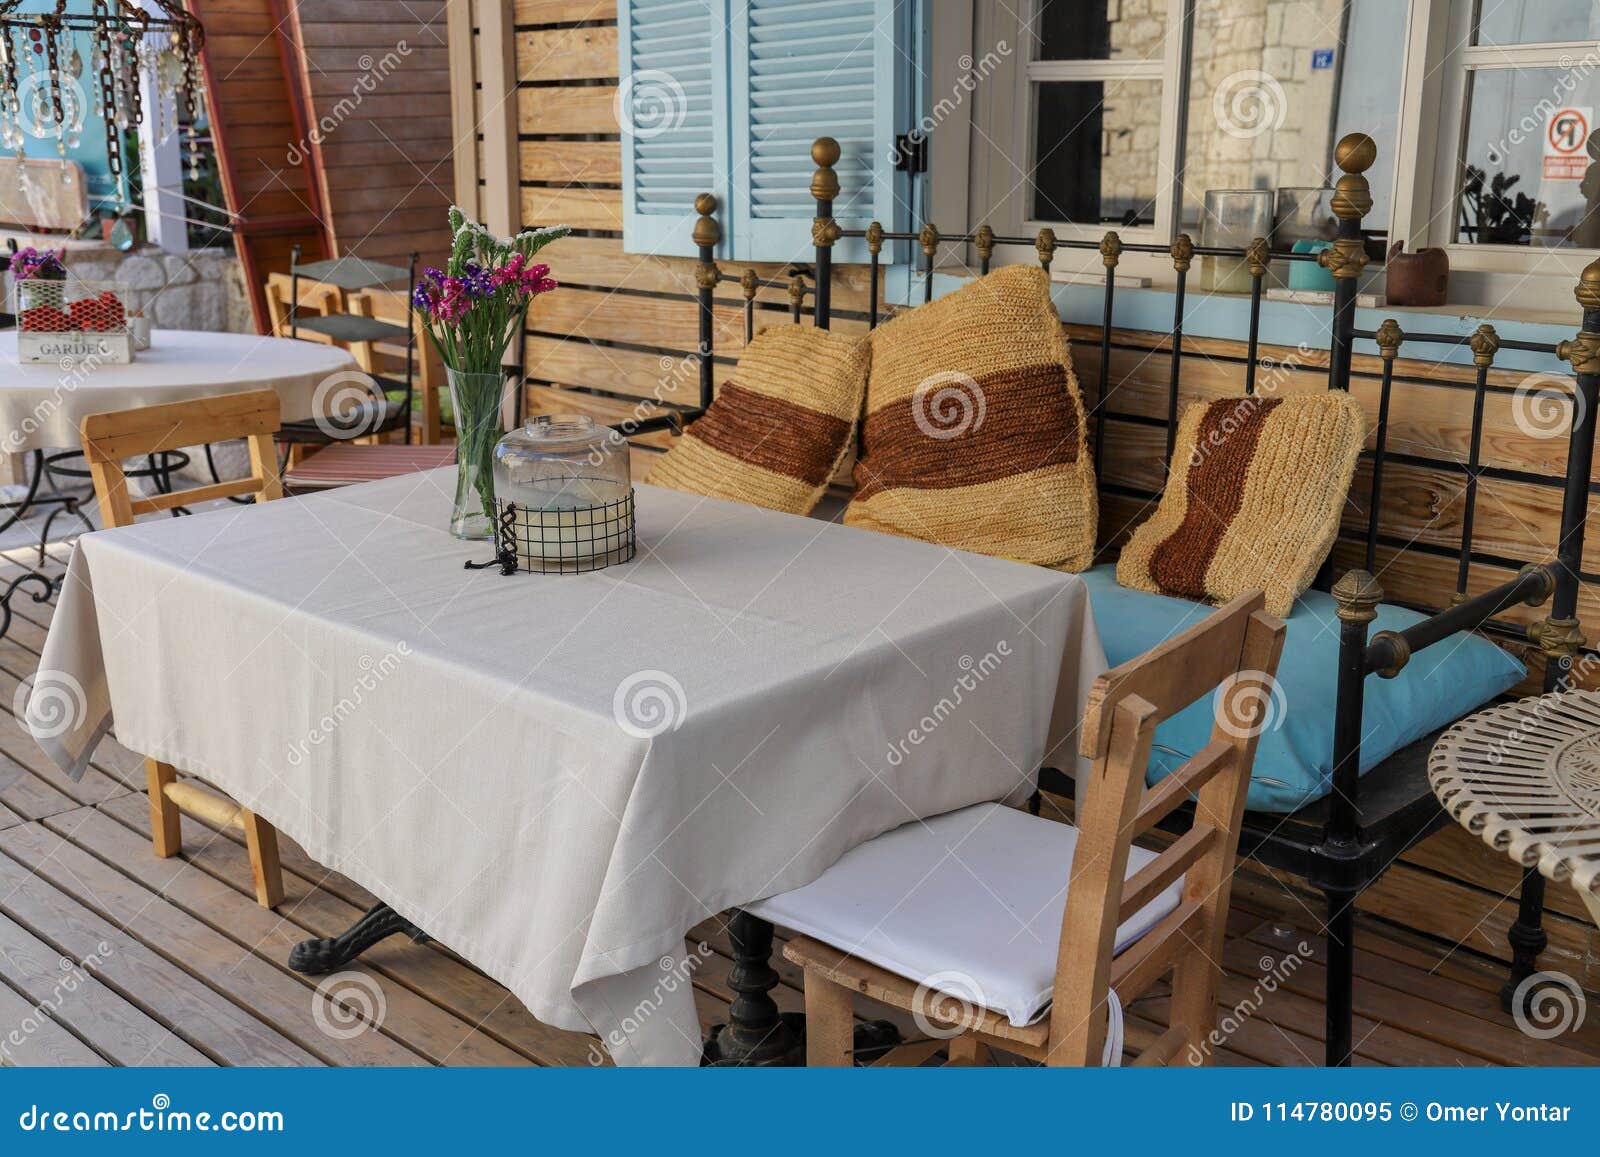 Tables And Chairs In Cafe Or Restaurants Outside Stock Image Image